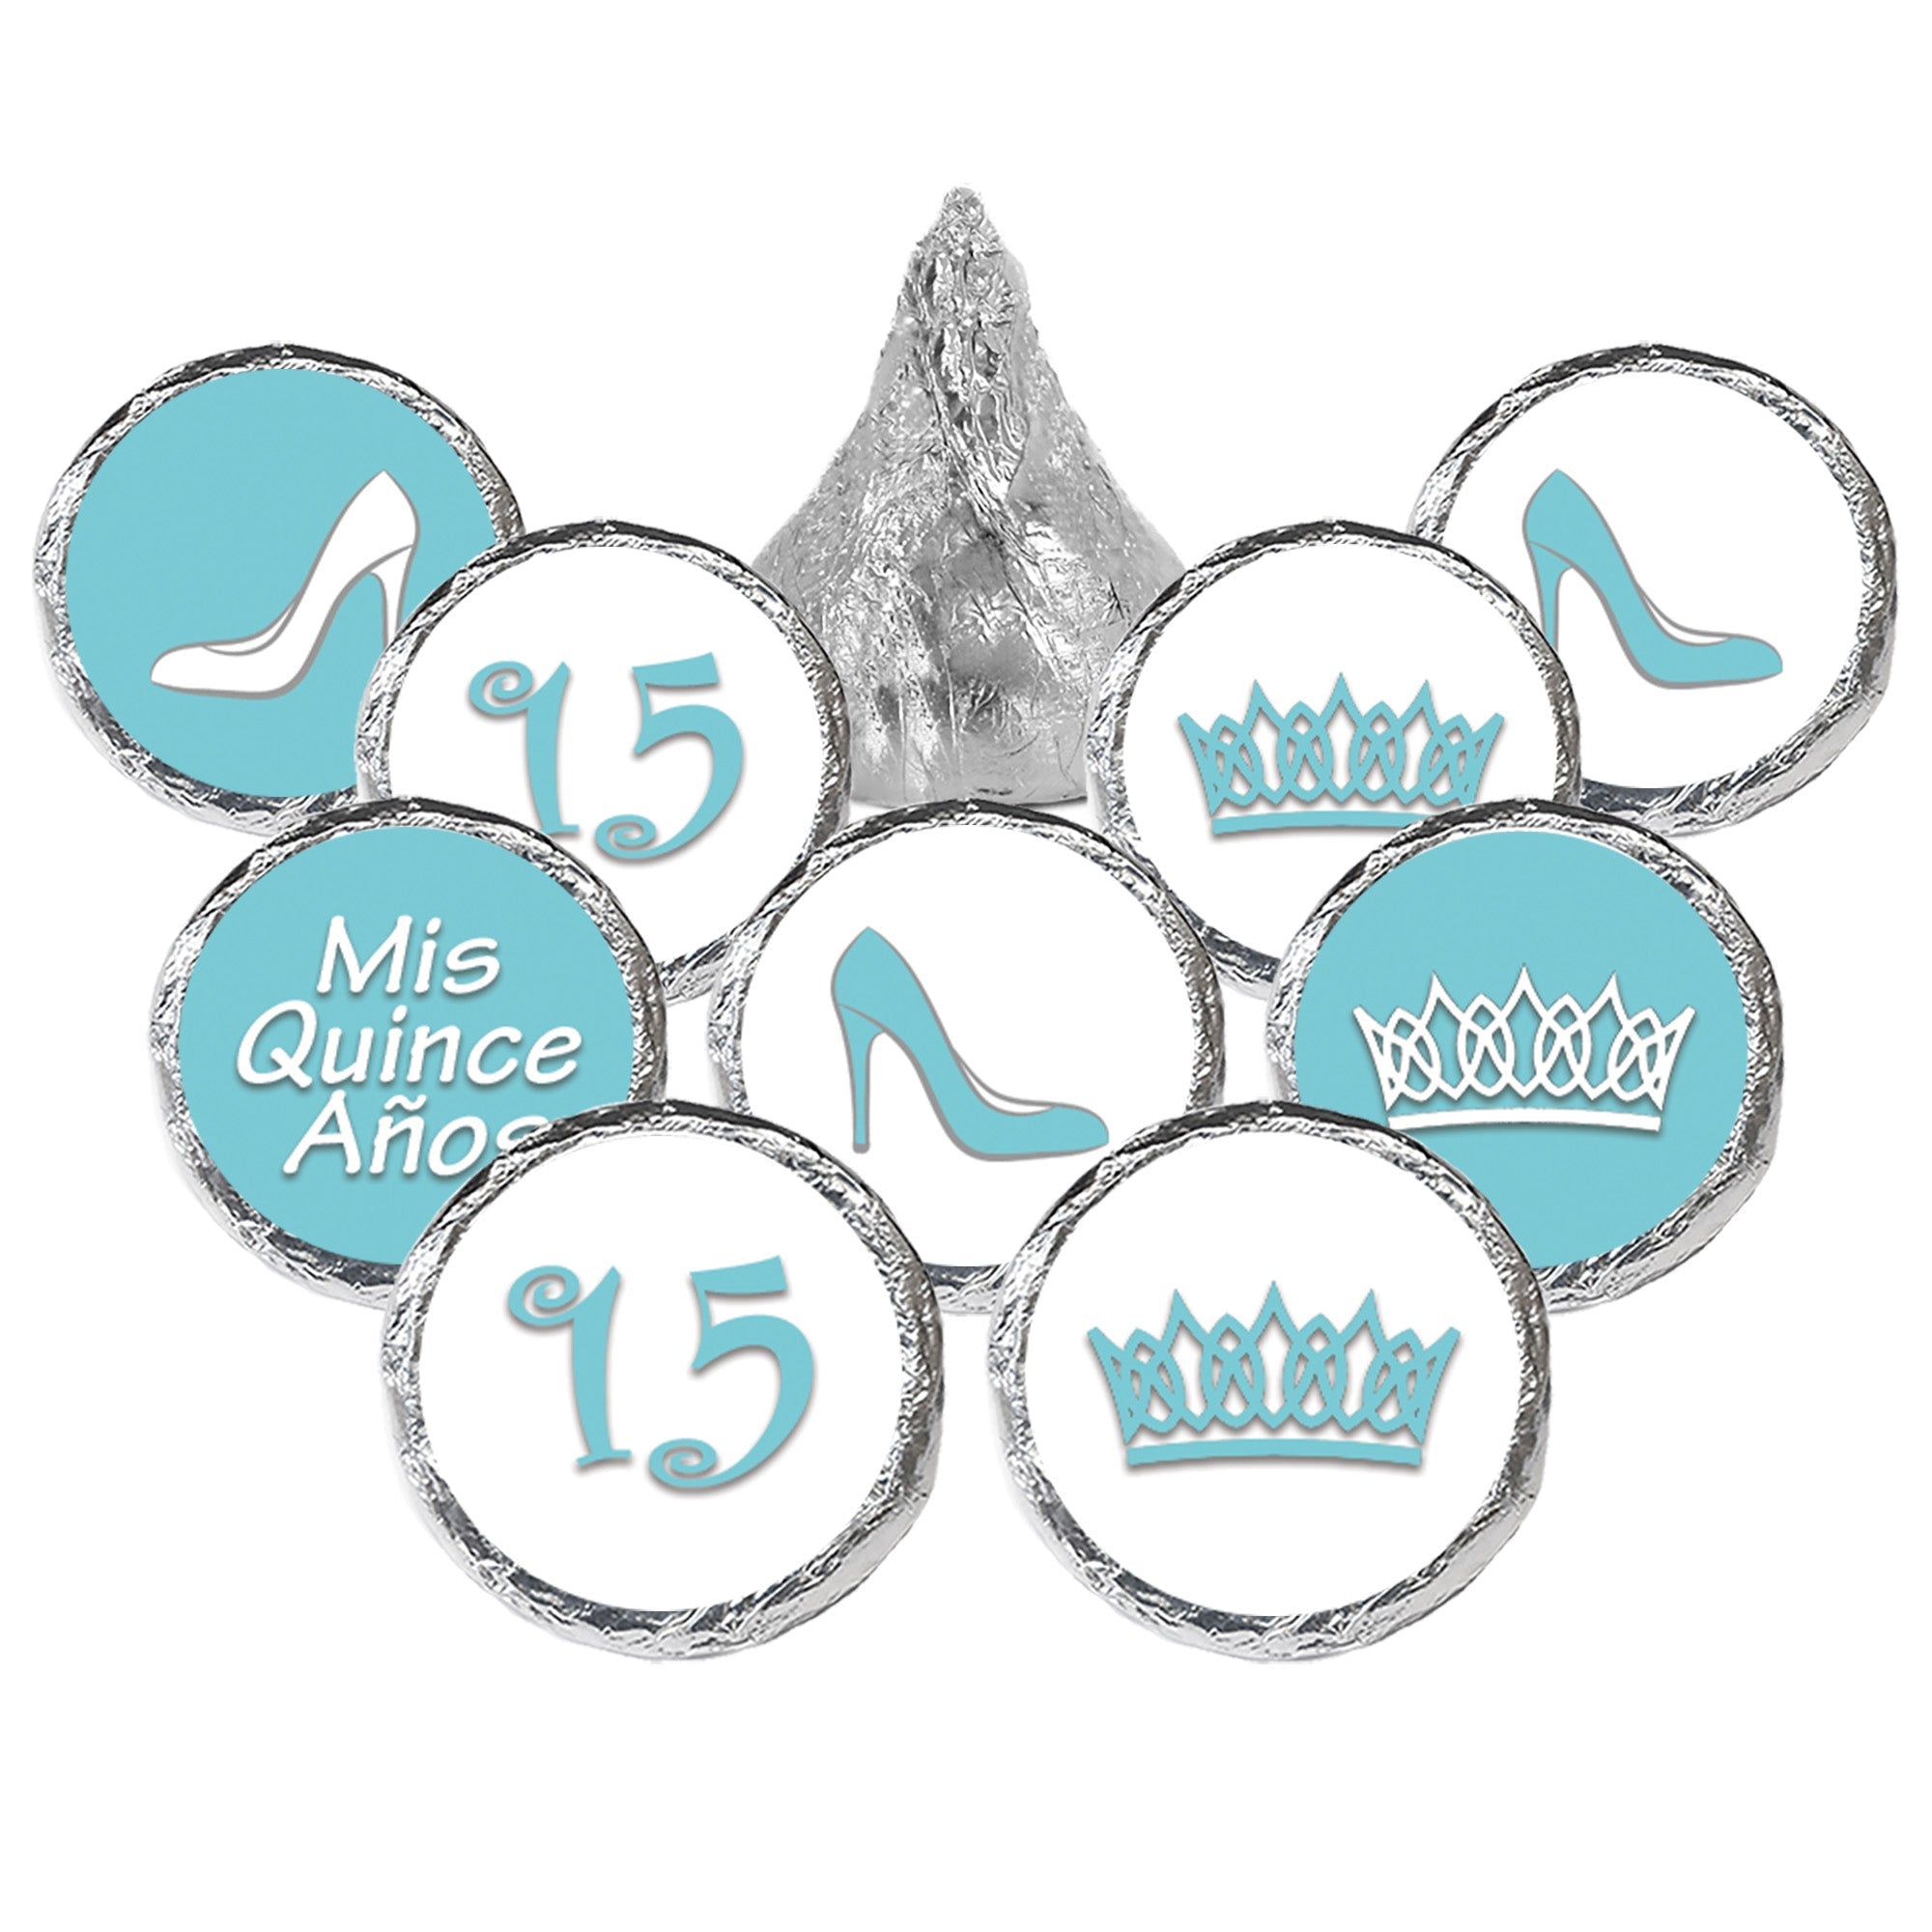 Quinceañera: Robin's Egg Blue - Party Favor Stickers - Fits on Hershey's Kisses - 180 Stickers